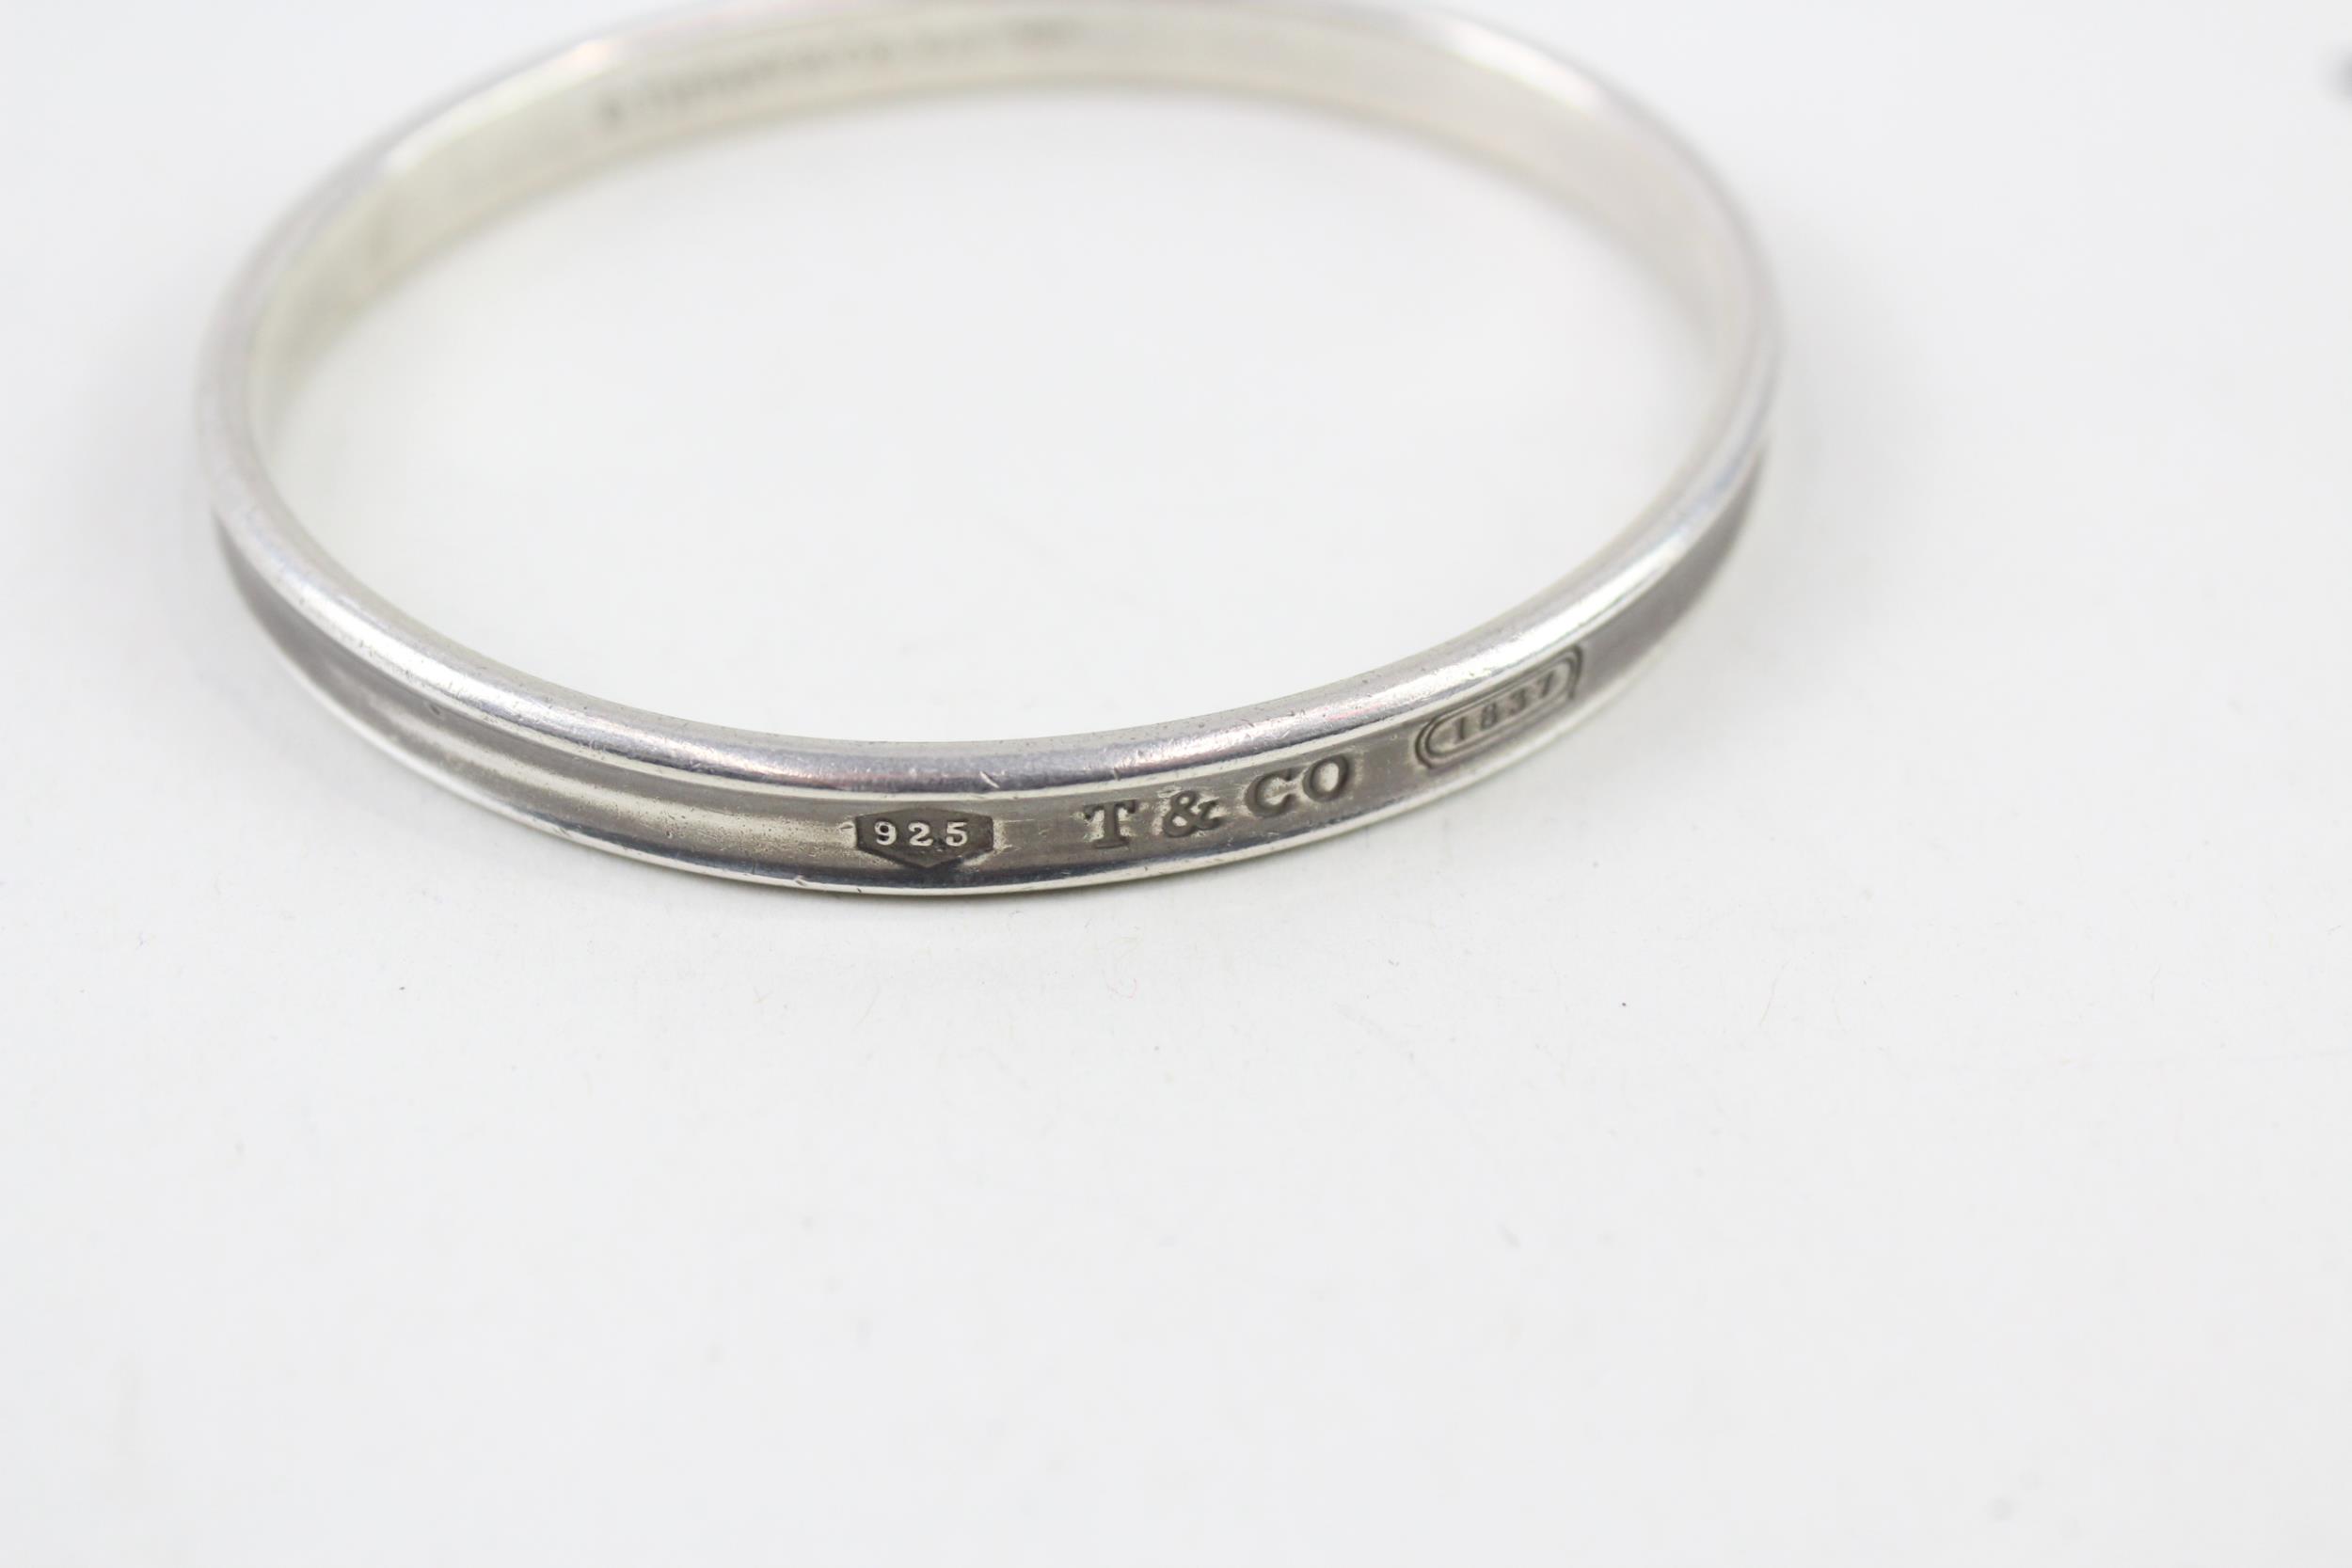 Silver bangle by designer Tiffany & Co (32g) - Image 12 of 12